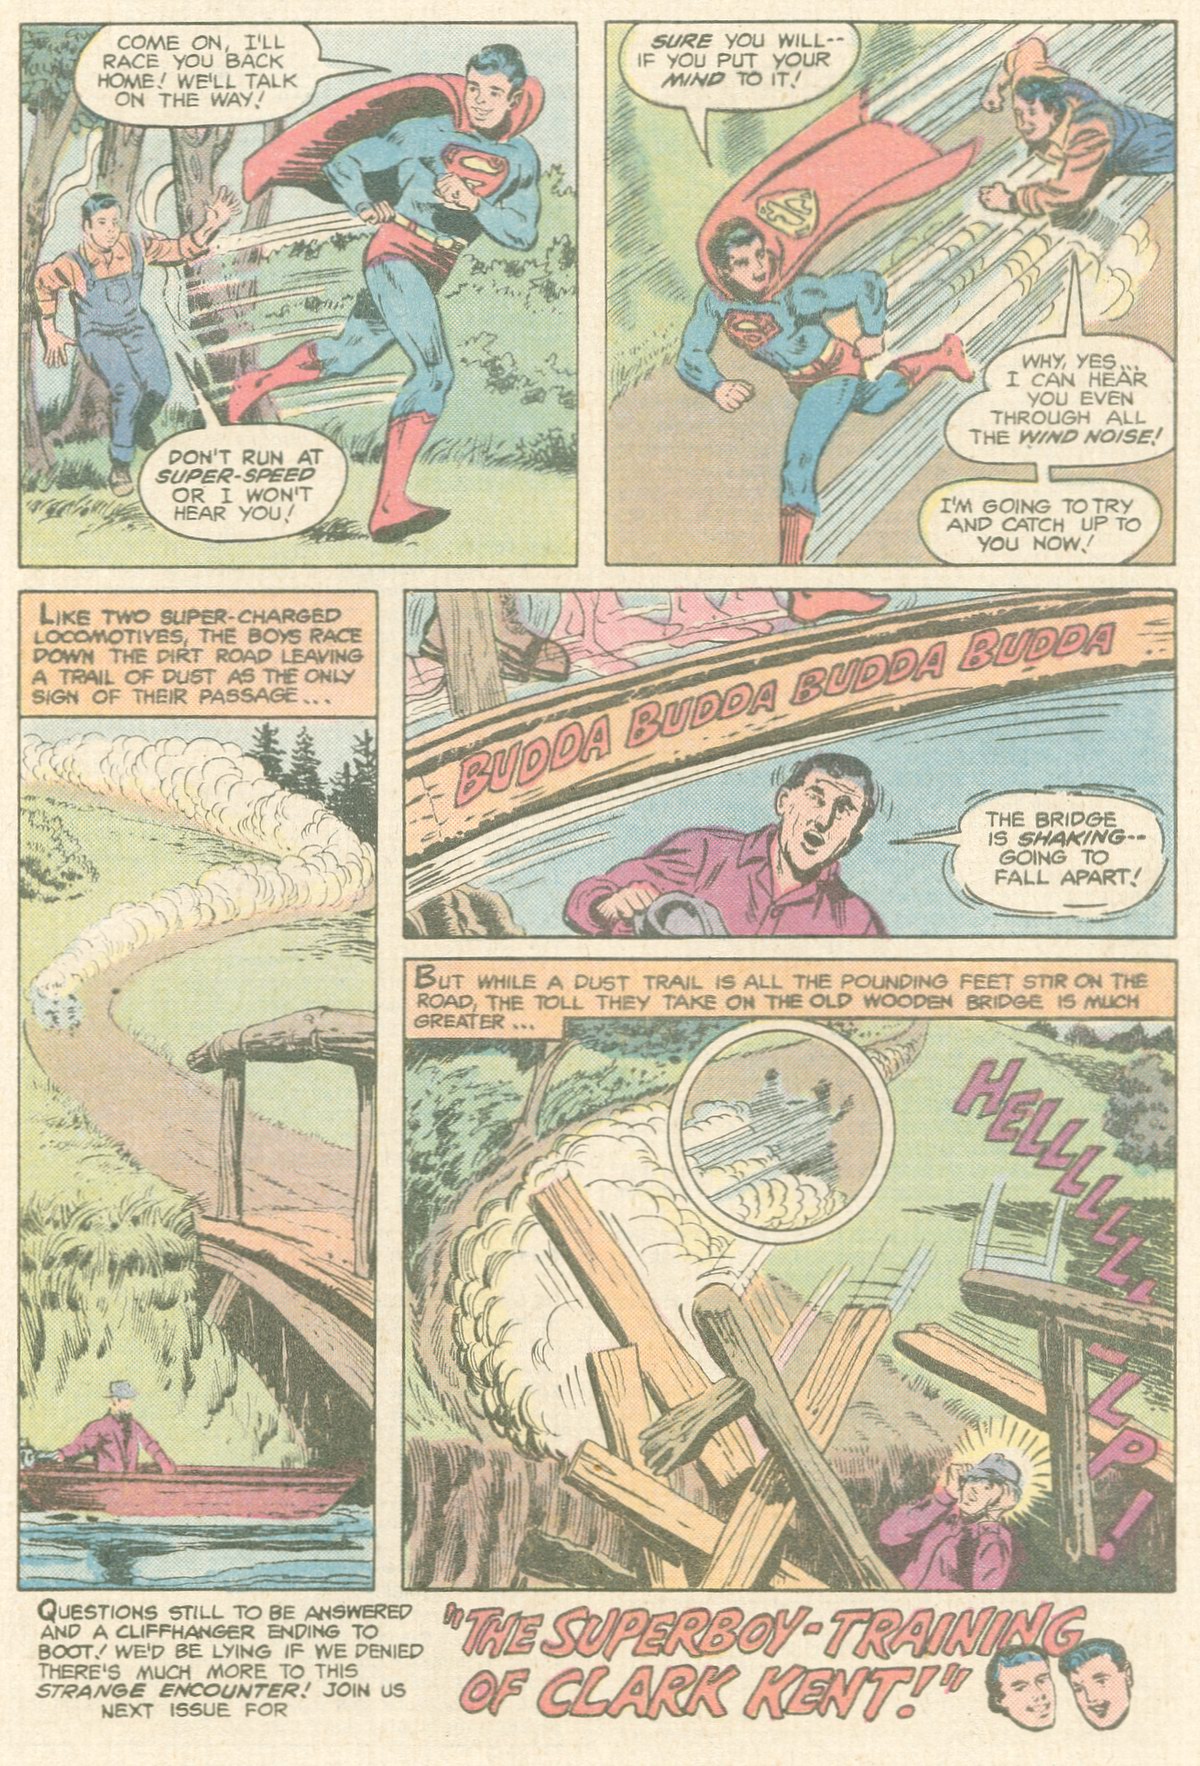 The New Adventures of Superboy 15 Page 25